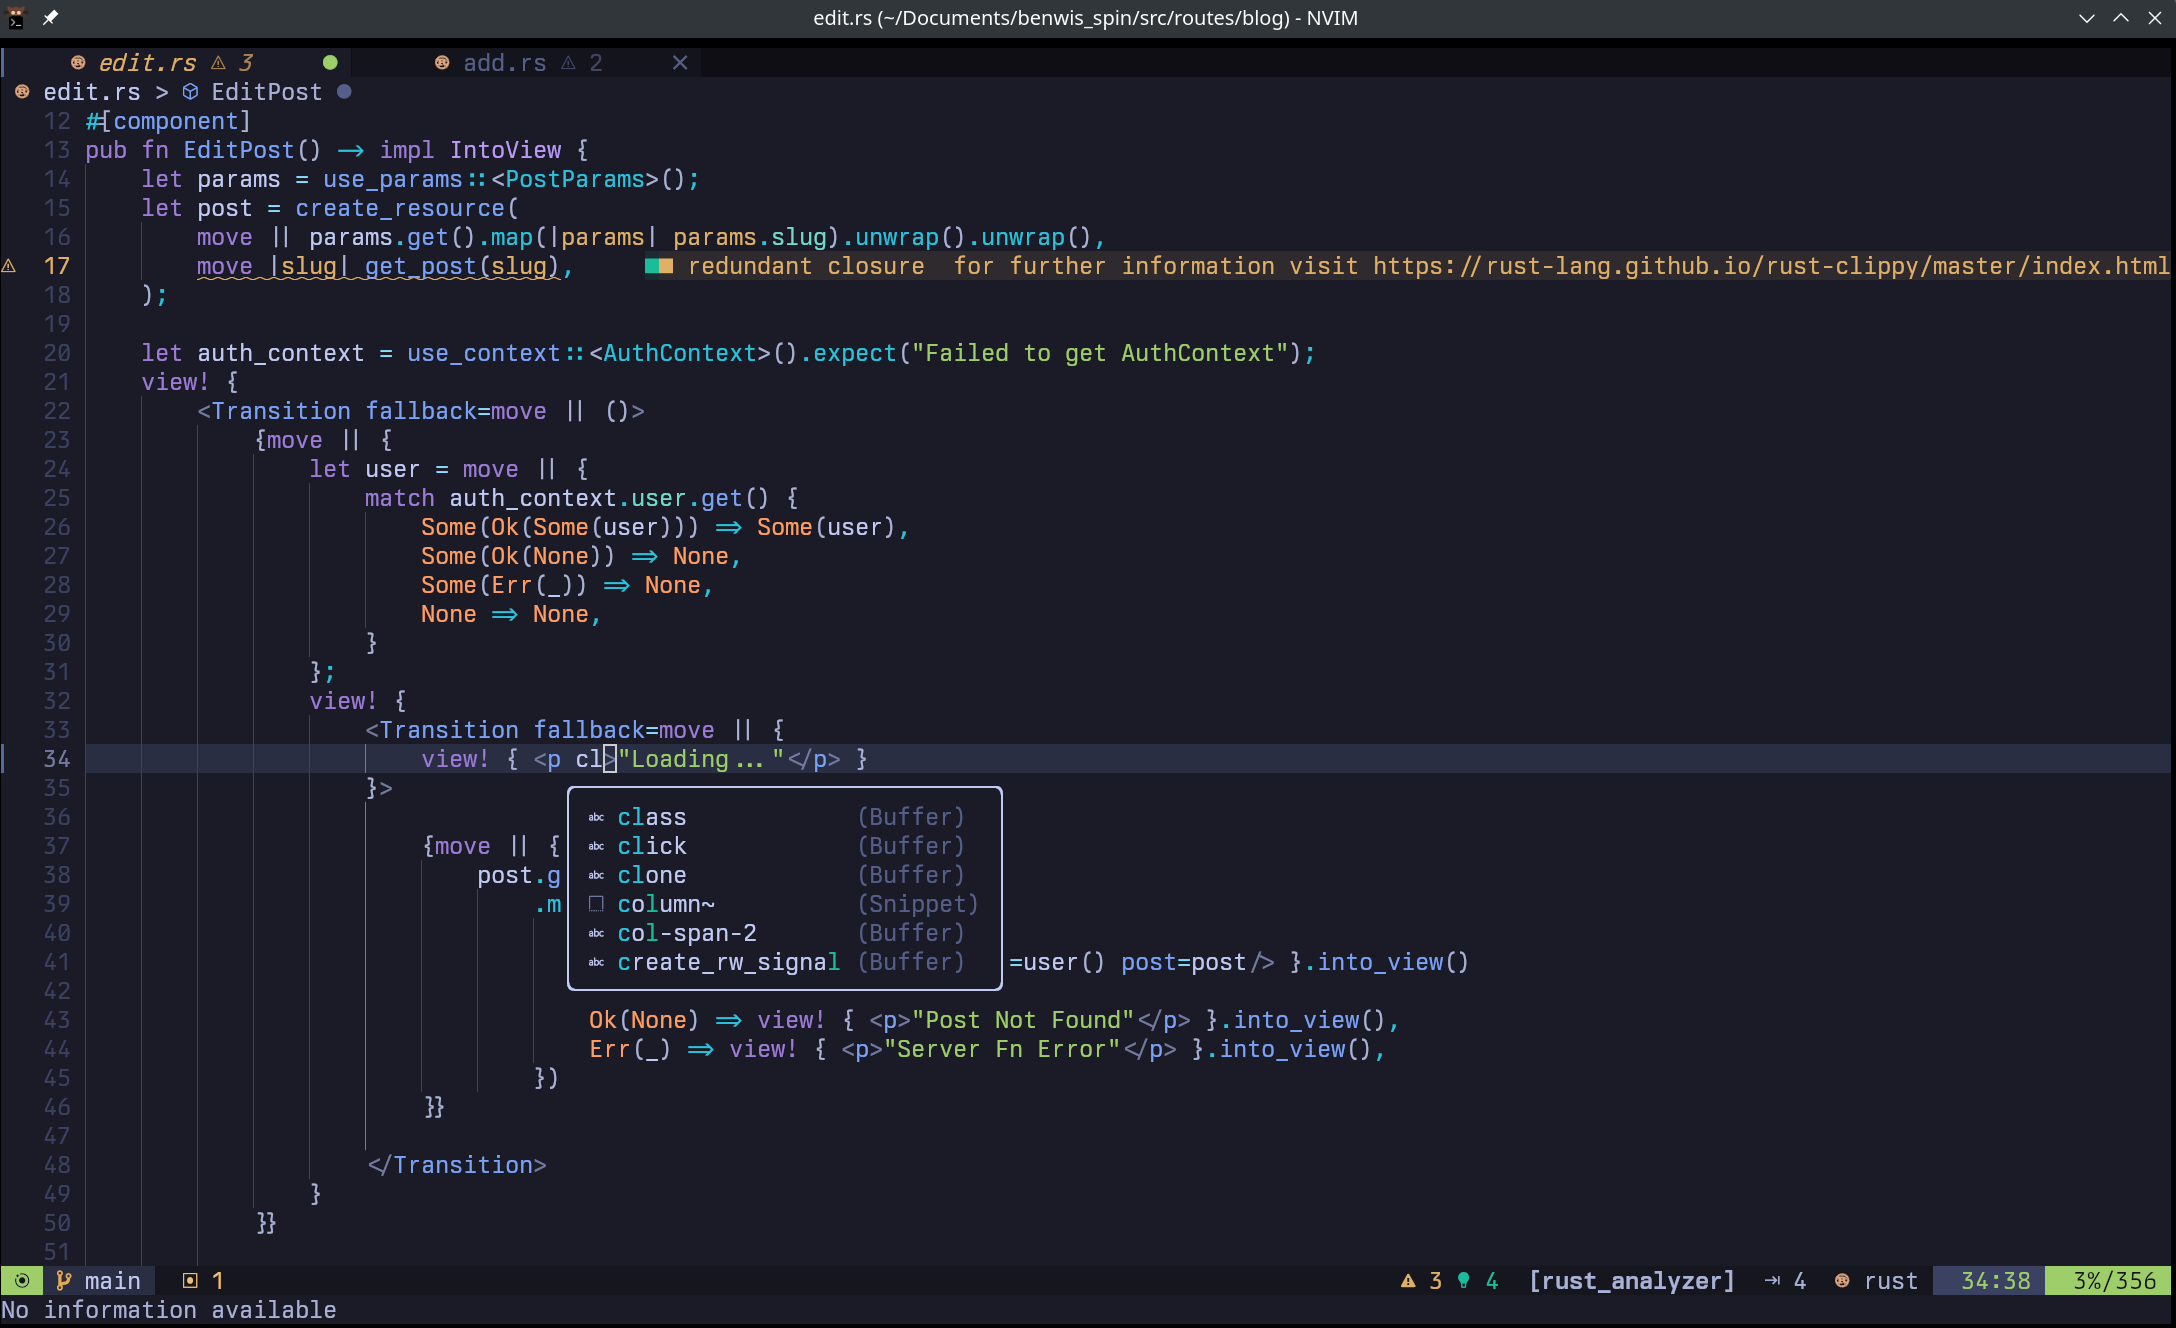 Neovim window editing a Leptos file with autocompletion, intellisense, and all the goodies